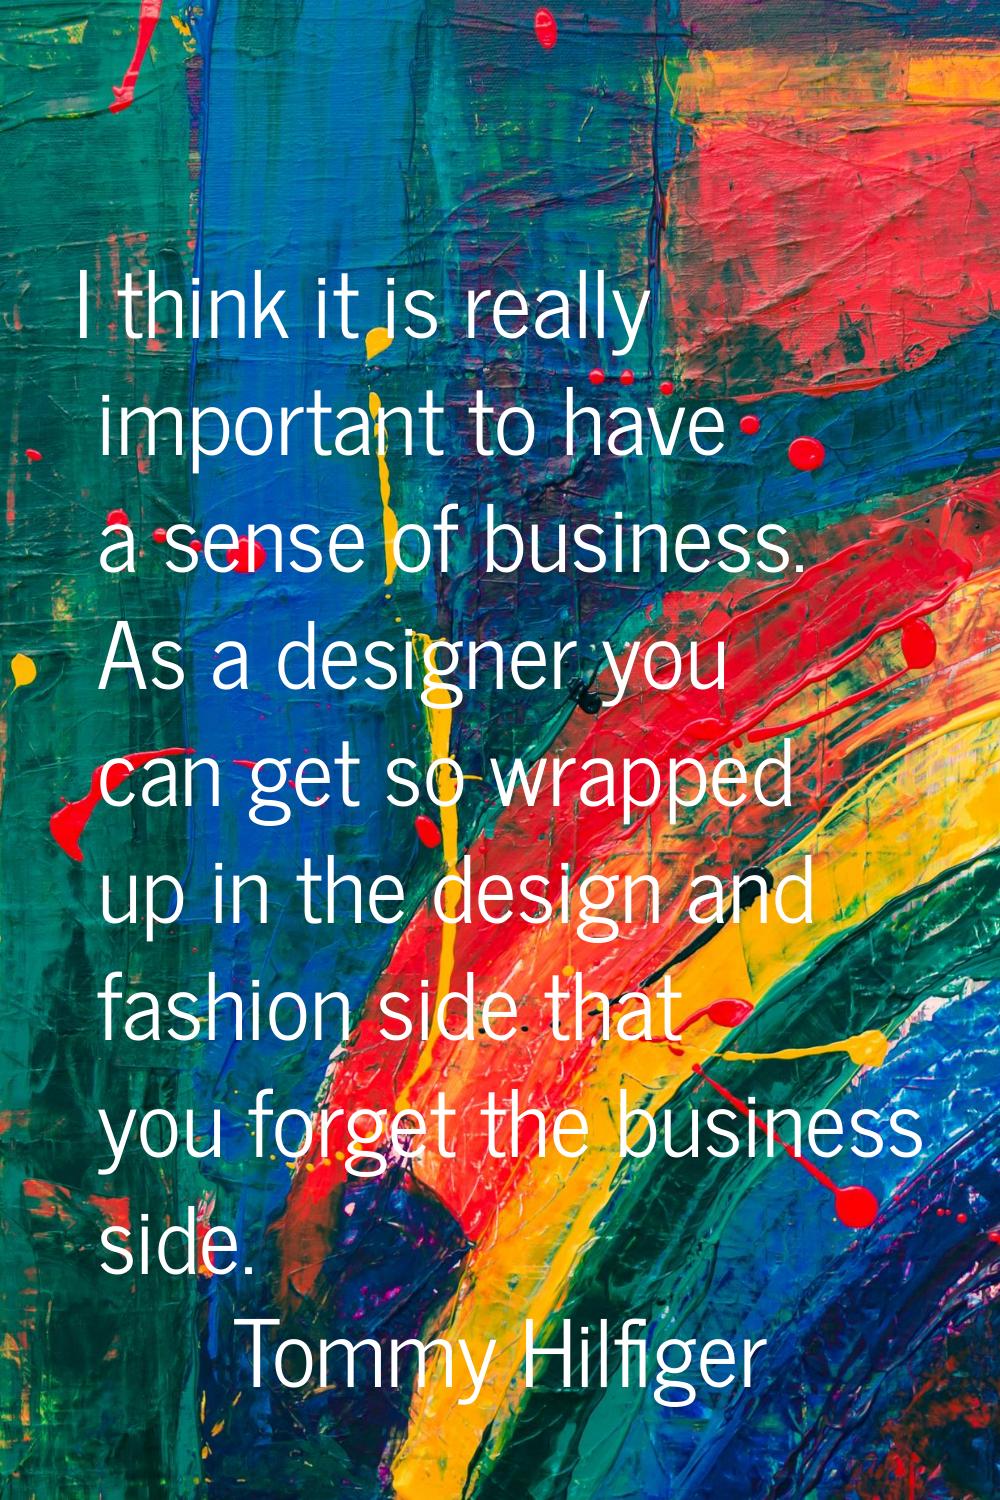 I think it is really important to have a sense of business. As a designer you can get so wrapped up